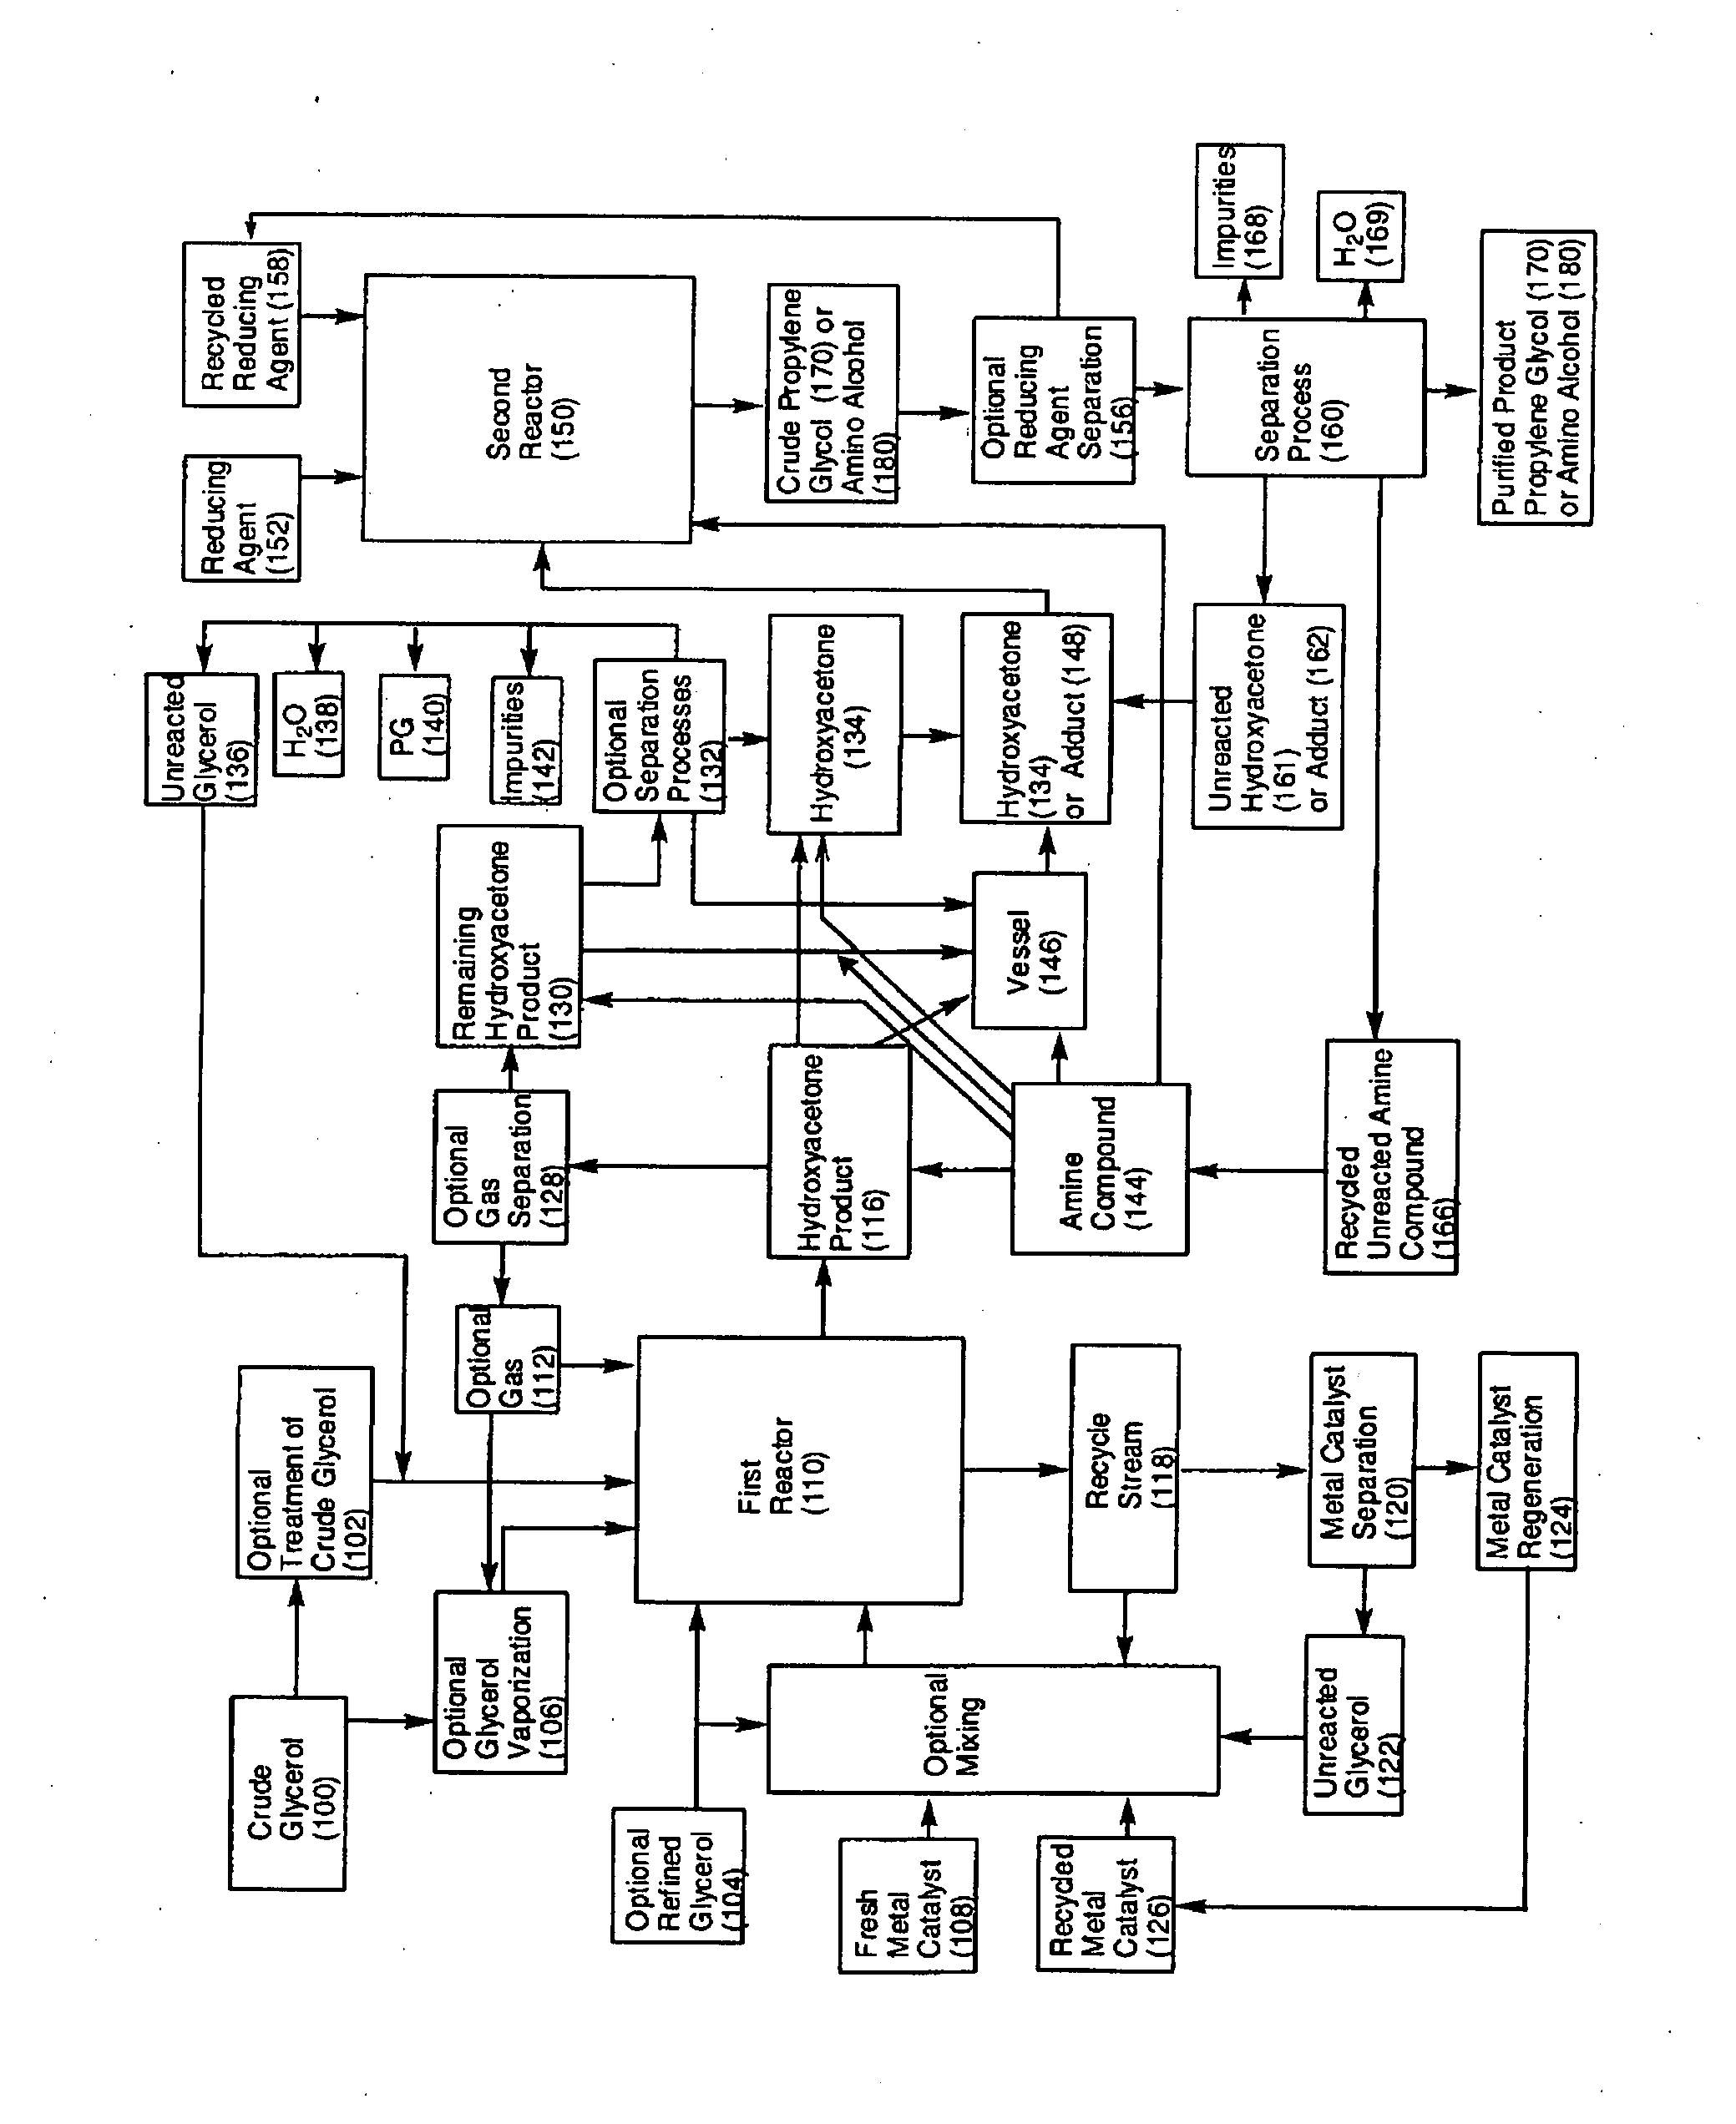 Process for the alternating conversion of glycerol to propylene glycol or amino alcohols